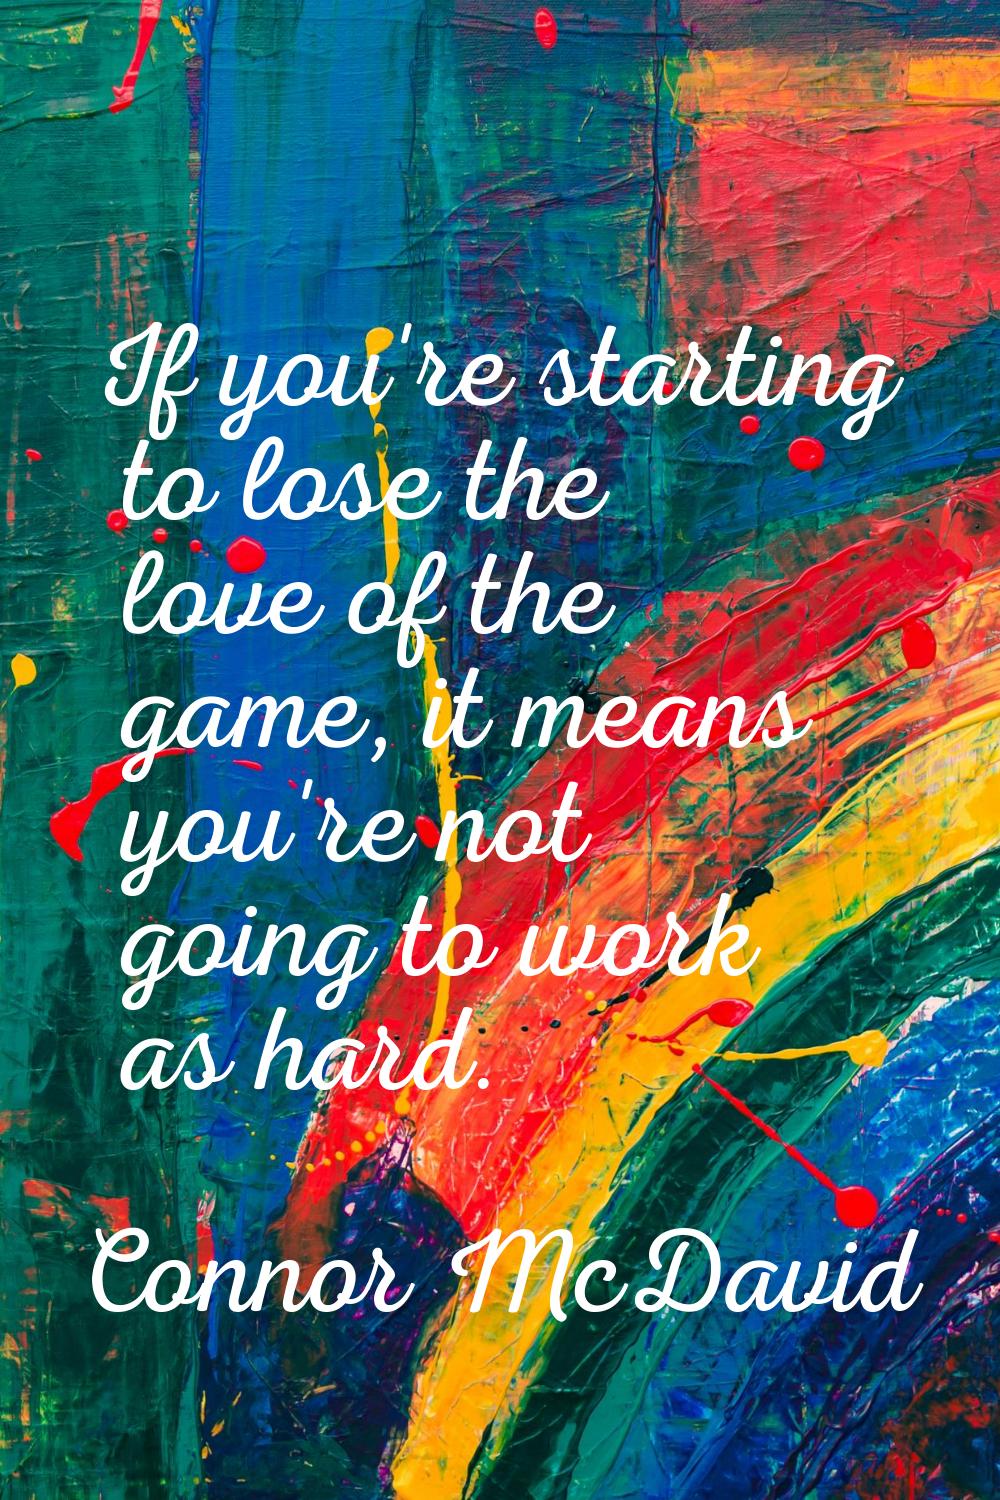 If you're starting to lose the love of the game, it means you're not going to work as hard.